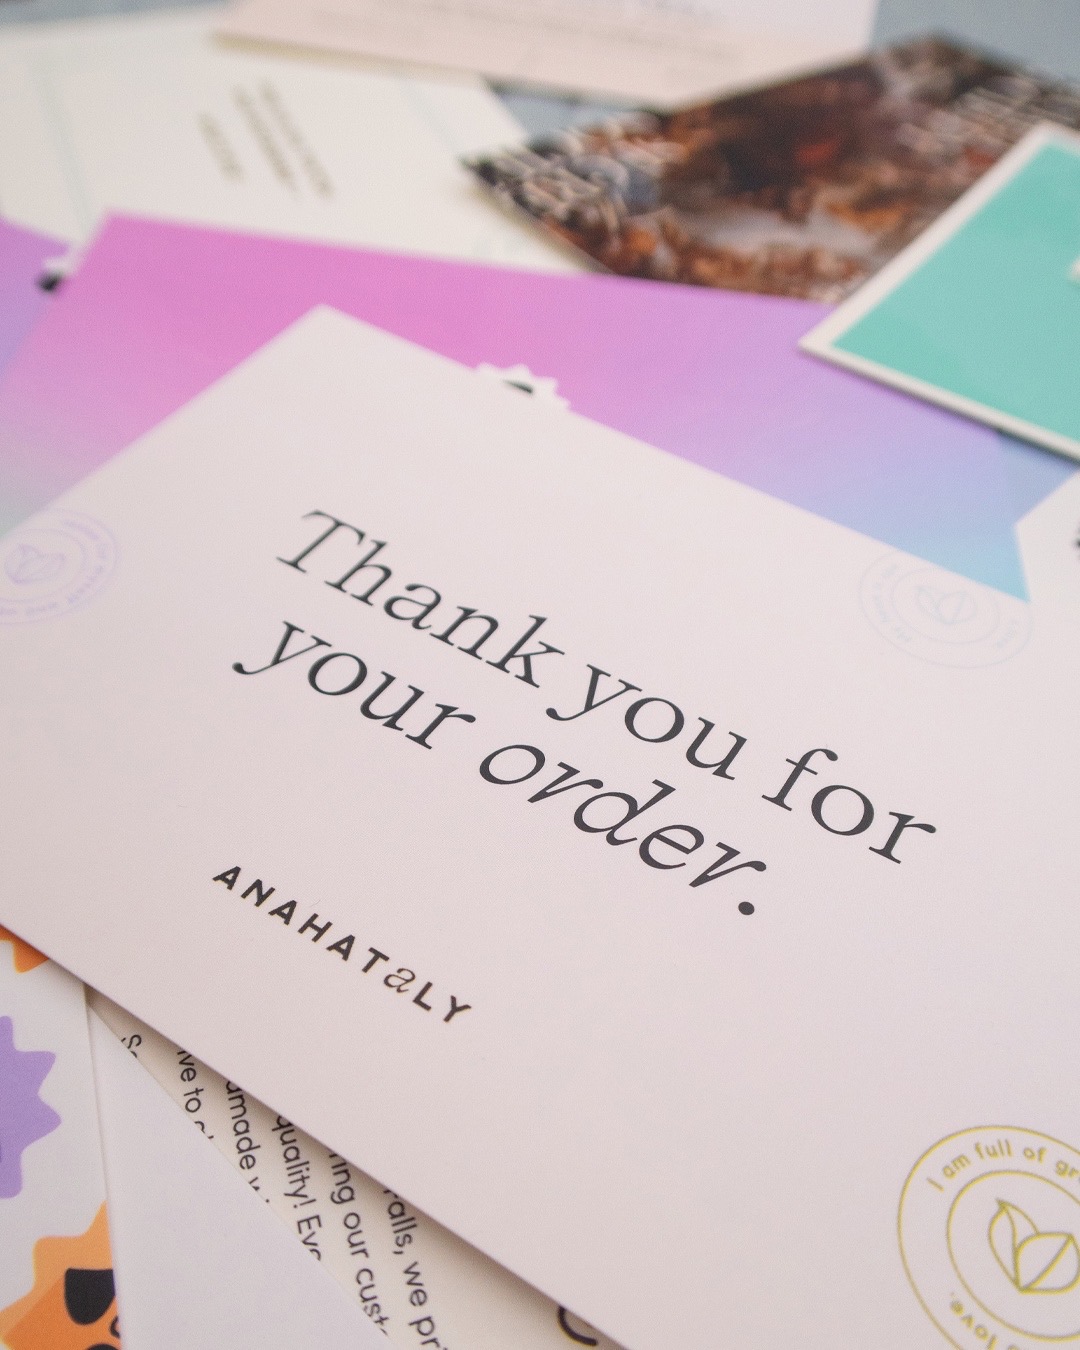 Packaging card for Anahataly, nourishing herbal products to aid others on their natural journey to optimal health - designed by Wiltshire-based graphic designer, Kaye Huett